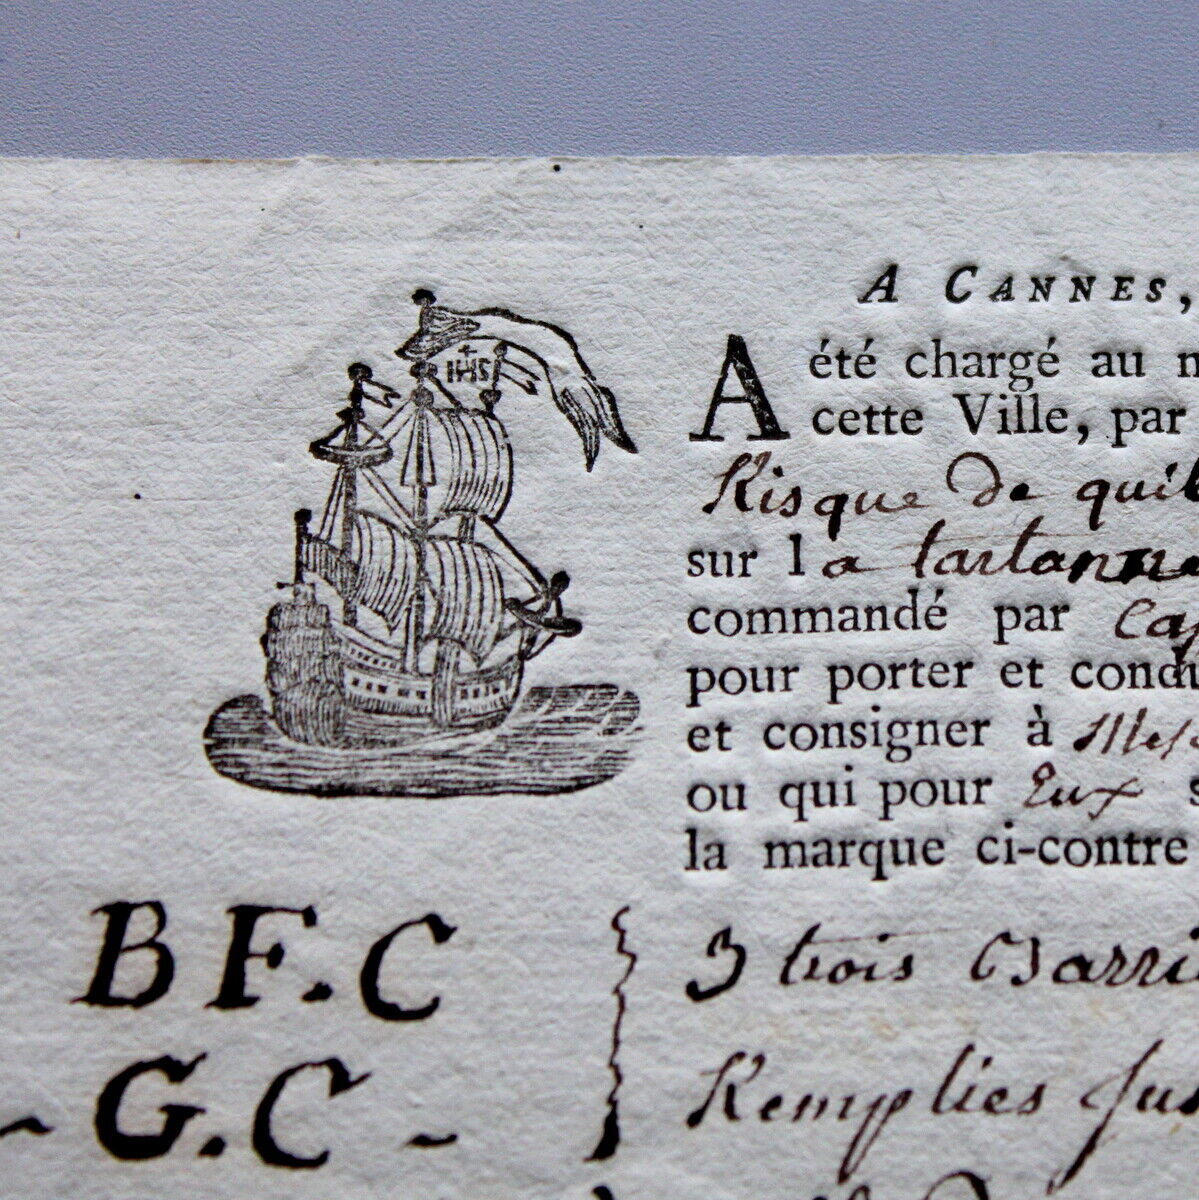 ANTIQUE LETTER FROM CANNES, France 1807, HISTORY OF SAILING FLEET,  DOCUMENT 